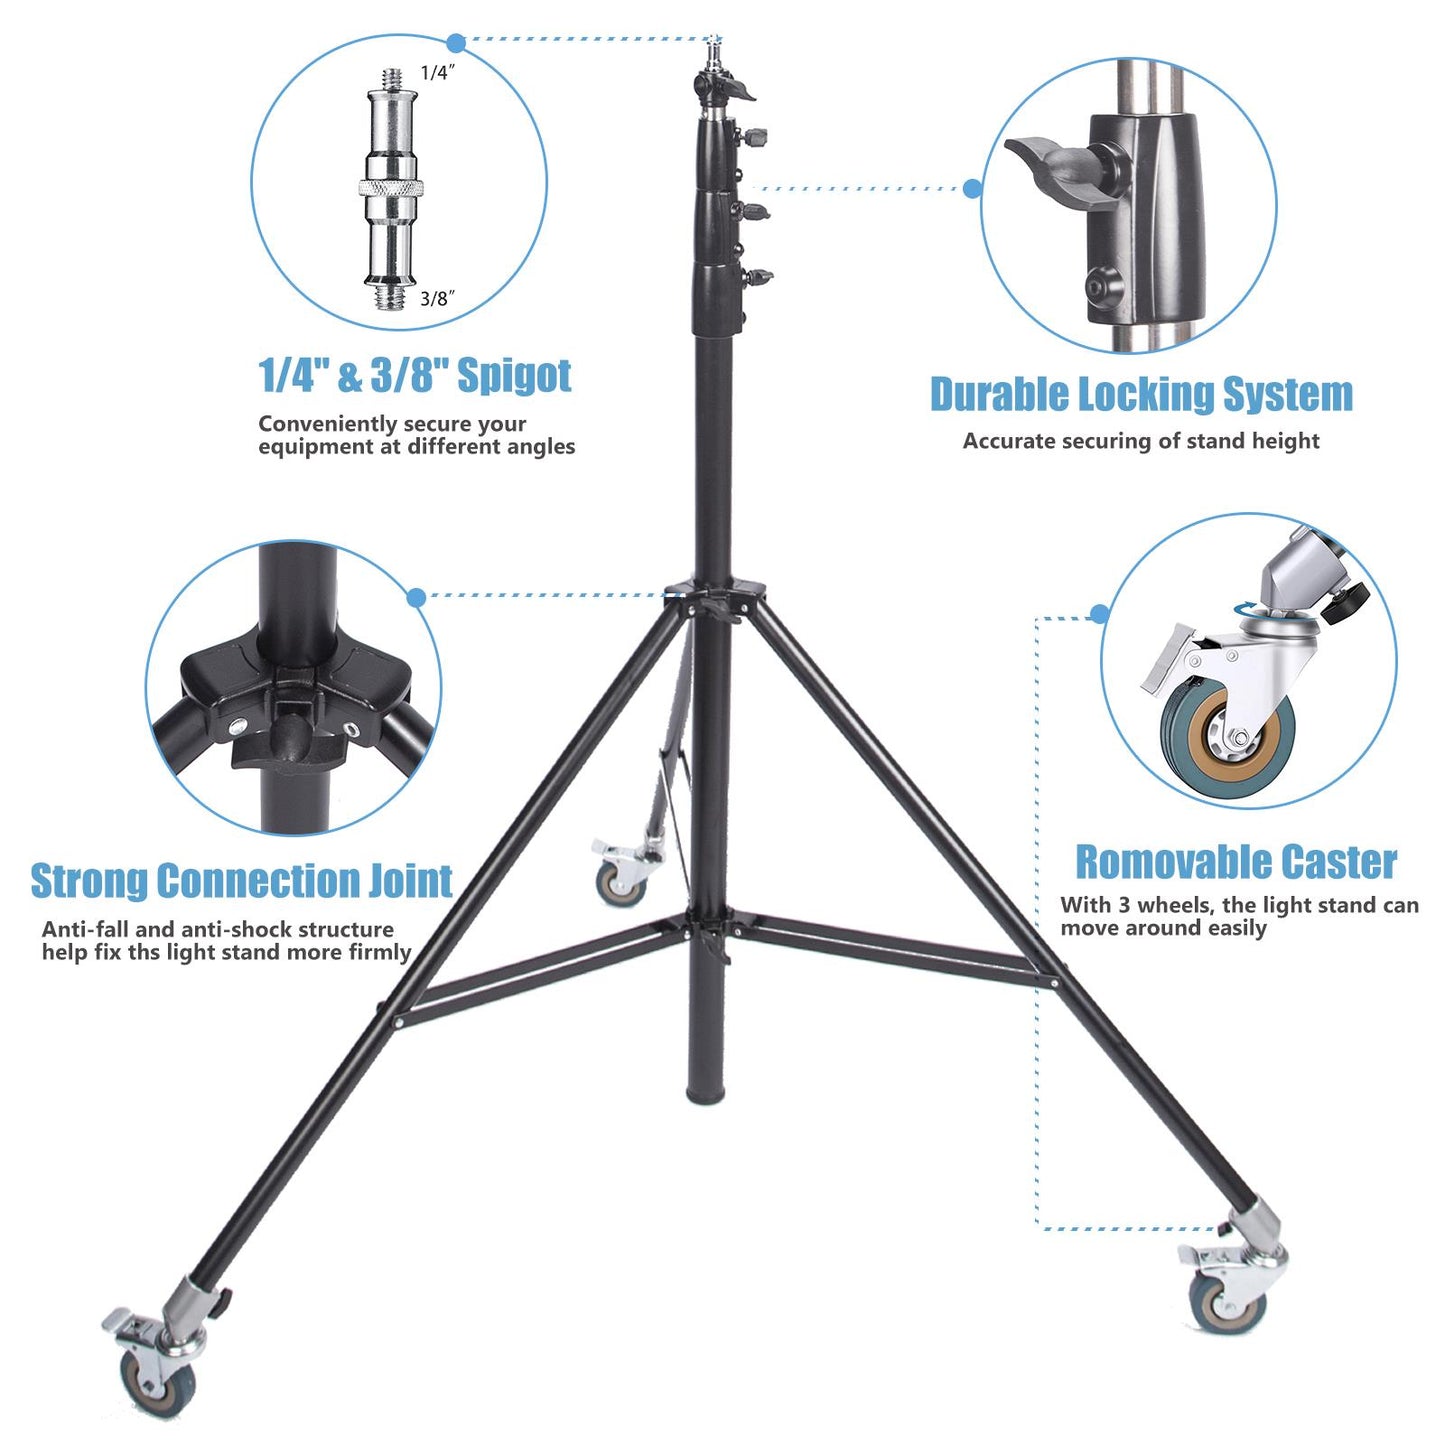 13ft 4M Heavy Duty Light Stand with Pulleys and Carry Bag, Spring Cushioned Tripod Stand, Photography Wheeled Stand for Photo Studio Monolight, Softbox and Other Photographic Equipment, 3 Sets